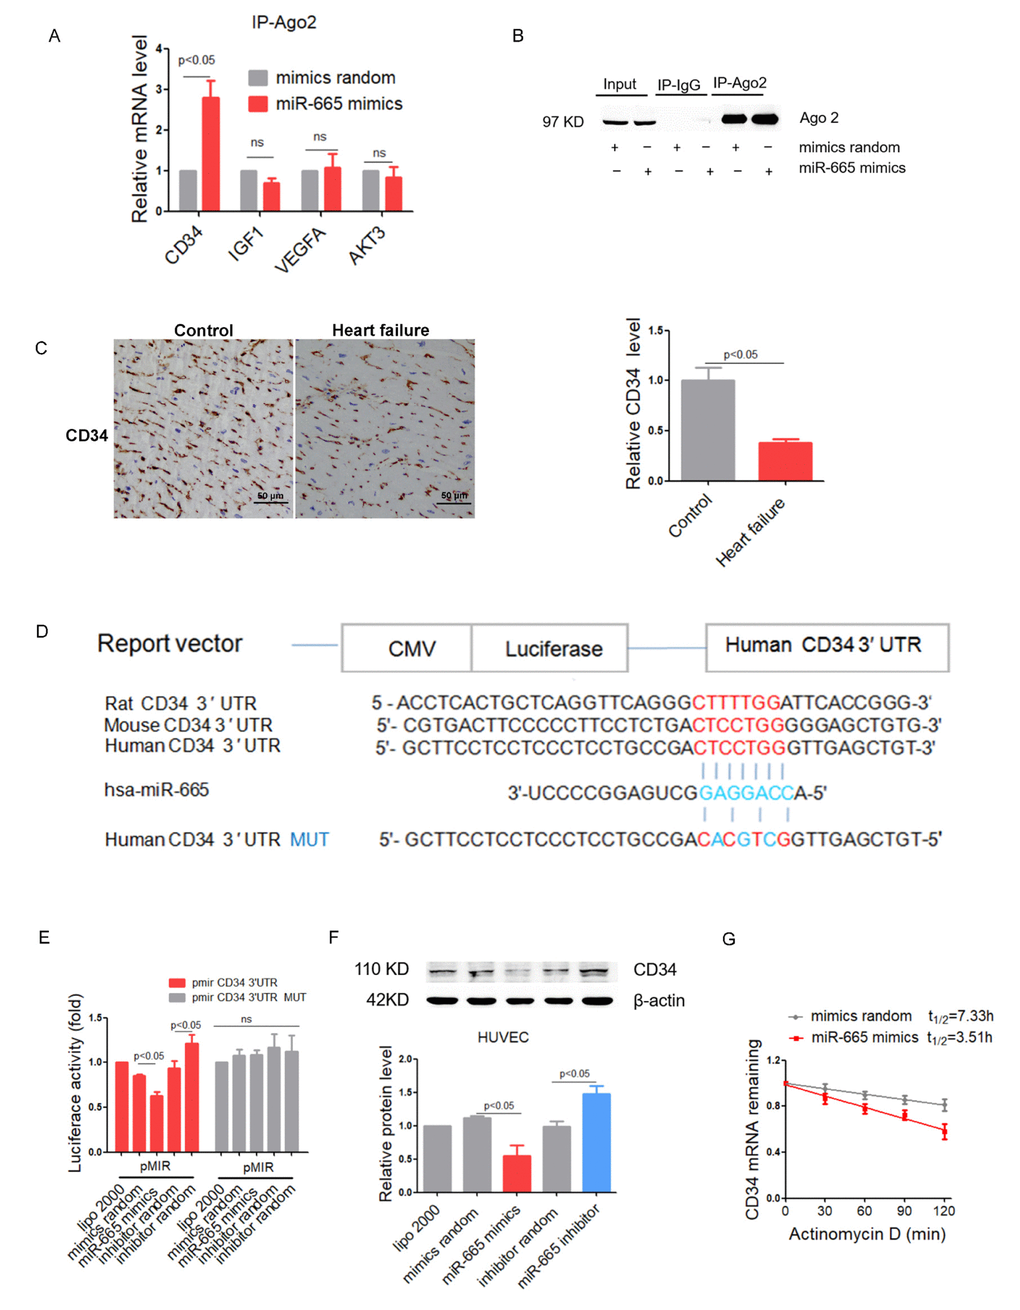 MiR-665 directly targets CD34 by interaction with the 3′ UTR. (A) Real-Time PCR analysis of mRNA in association with Ago2 in HUVEC cells. Results from control were set to 1 (n=4). (B) Ago2 protein levels in co-immunoprecipitated products measured by Western blotting. (C) Representative immunohistochemical staining of CD34 in human heart (control, n = 2; heart failure [HF], n = 5). (D) Schematic representation of predicted target sites of miR-665 in the 3’ UTR of CD34. (E) Regulation of miR-665 on 3’ UTR of CD34 in HEK293 cell by luciferase reporter assay (n=4). (F) CD34 protein levels in treated HUVEC cells detected by Western blotting (n=4). (G) Stability curves of CD34 mRNA in treated HUVEC cells (n=3). Data are expressed as mean ± SEM.